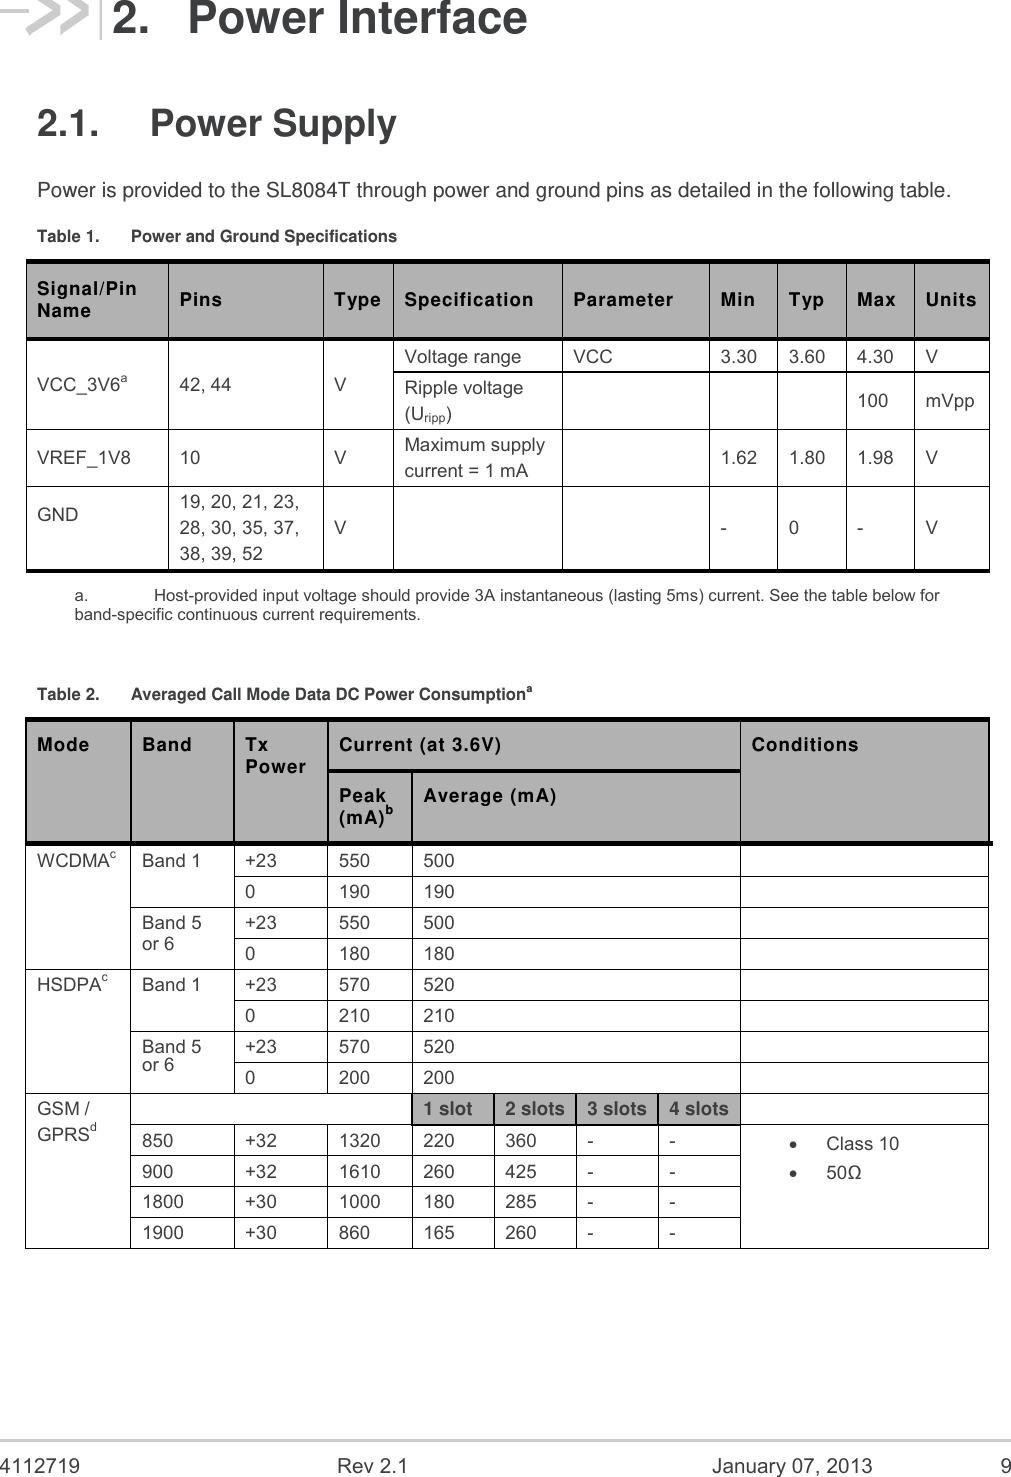  4112719  Rev 2.1  January 07, 2013  9 2.  Power Interface 2.1.  Power Supply Power is provided to the SL8084T through power and ground pins as detailed in the following table. Table 1.  Power and Ground Specifications Signal/Pin Name Pins Type Specification Parameter Min Typ Max Units VCC_3V6a 42, 44 V Voltage range VCC 3.30 3.60 4.30 V Ripple voltage (Uripp)    100 mVpp VREF_1V8  10 V  Maximum supply current = 1 mA  1.62 1.80 1.98 V GND  19, 20, 21, 23, 28, 30, 35, 37, 38, 39, 52 V    - 0 - V a.    Host-provided input voltage should provide 3A instantaneous (lasting 5ms) current. See the table below for band-specific continuous current requirements.  Table 2.  Averaged Call Mode Data DC Power Consumptiona Mode Band Tx Power Current (at 3.6V) Conditions Peak (mA)b Average (mA) WCDMAc Band 1 +23 550 500  0 190 190  Band 5 or 6 +23 550 500  0 180 180  HSDPAc Band 1 +23 570 520  0 210 210  Band 5 +23 570 520  0 200 200  GSM / GPRSd  1 slot 2 slots 3 slots 4 slots  850 +32 1320 220 360 - -   Class 10  50Ω 900 +32 1610 260 425 - - 1800 +30 1000 180 285 - - 1900 +30 860 165 260 - - or 6 